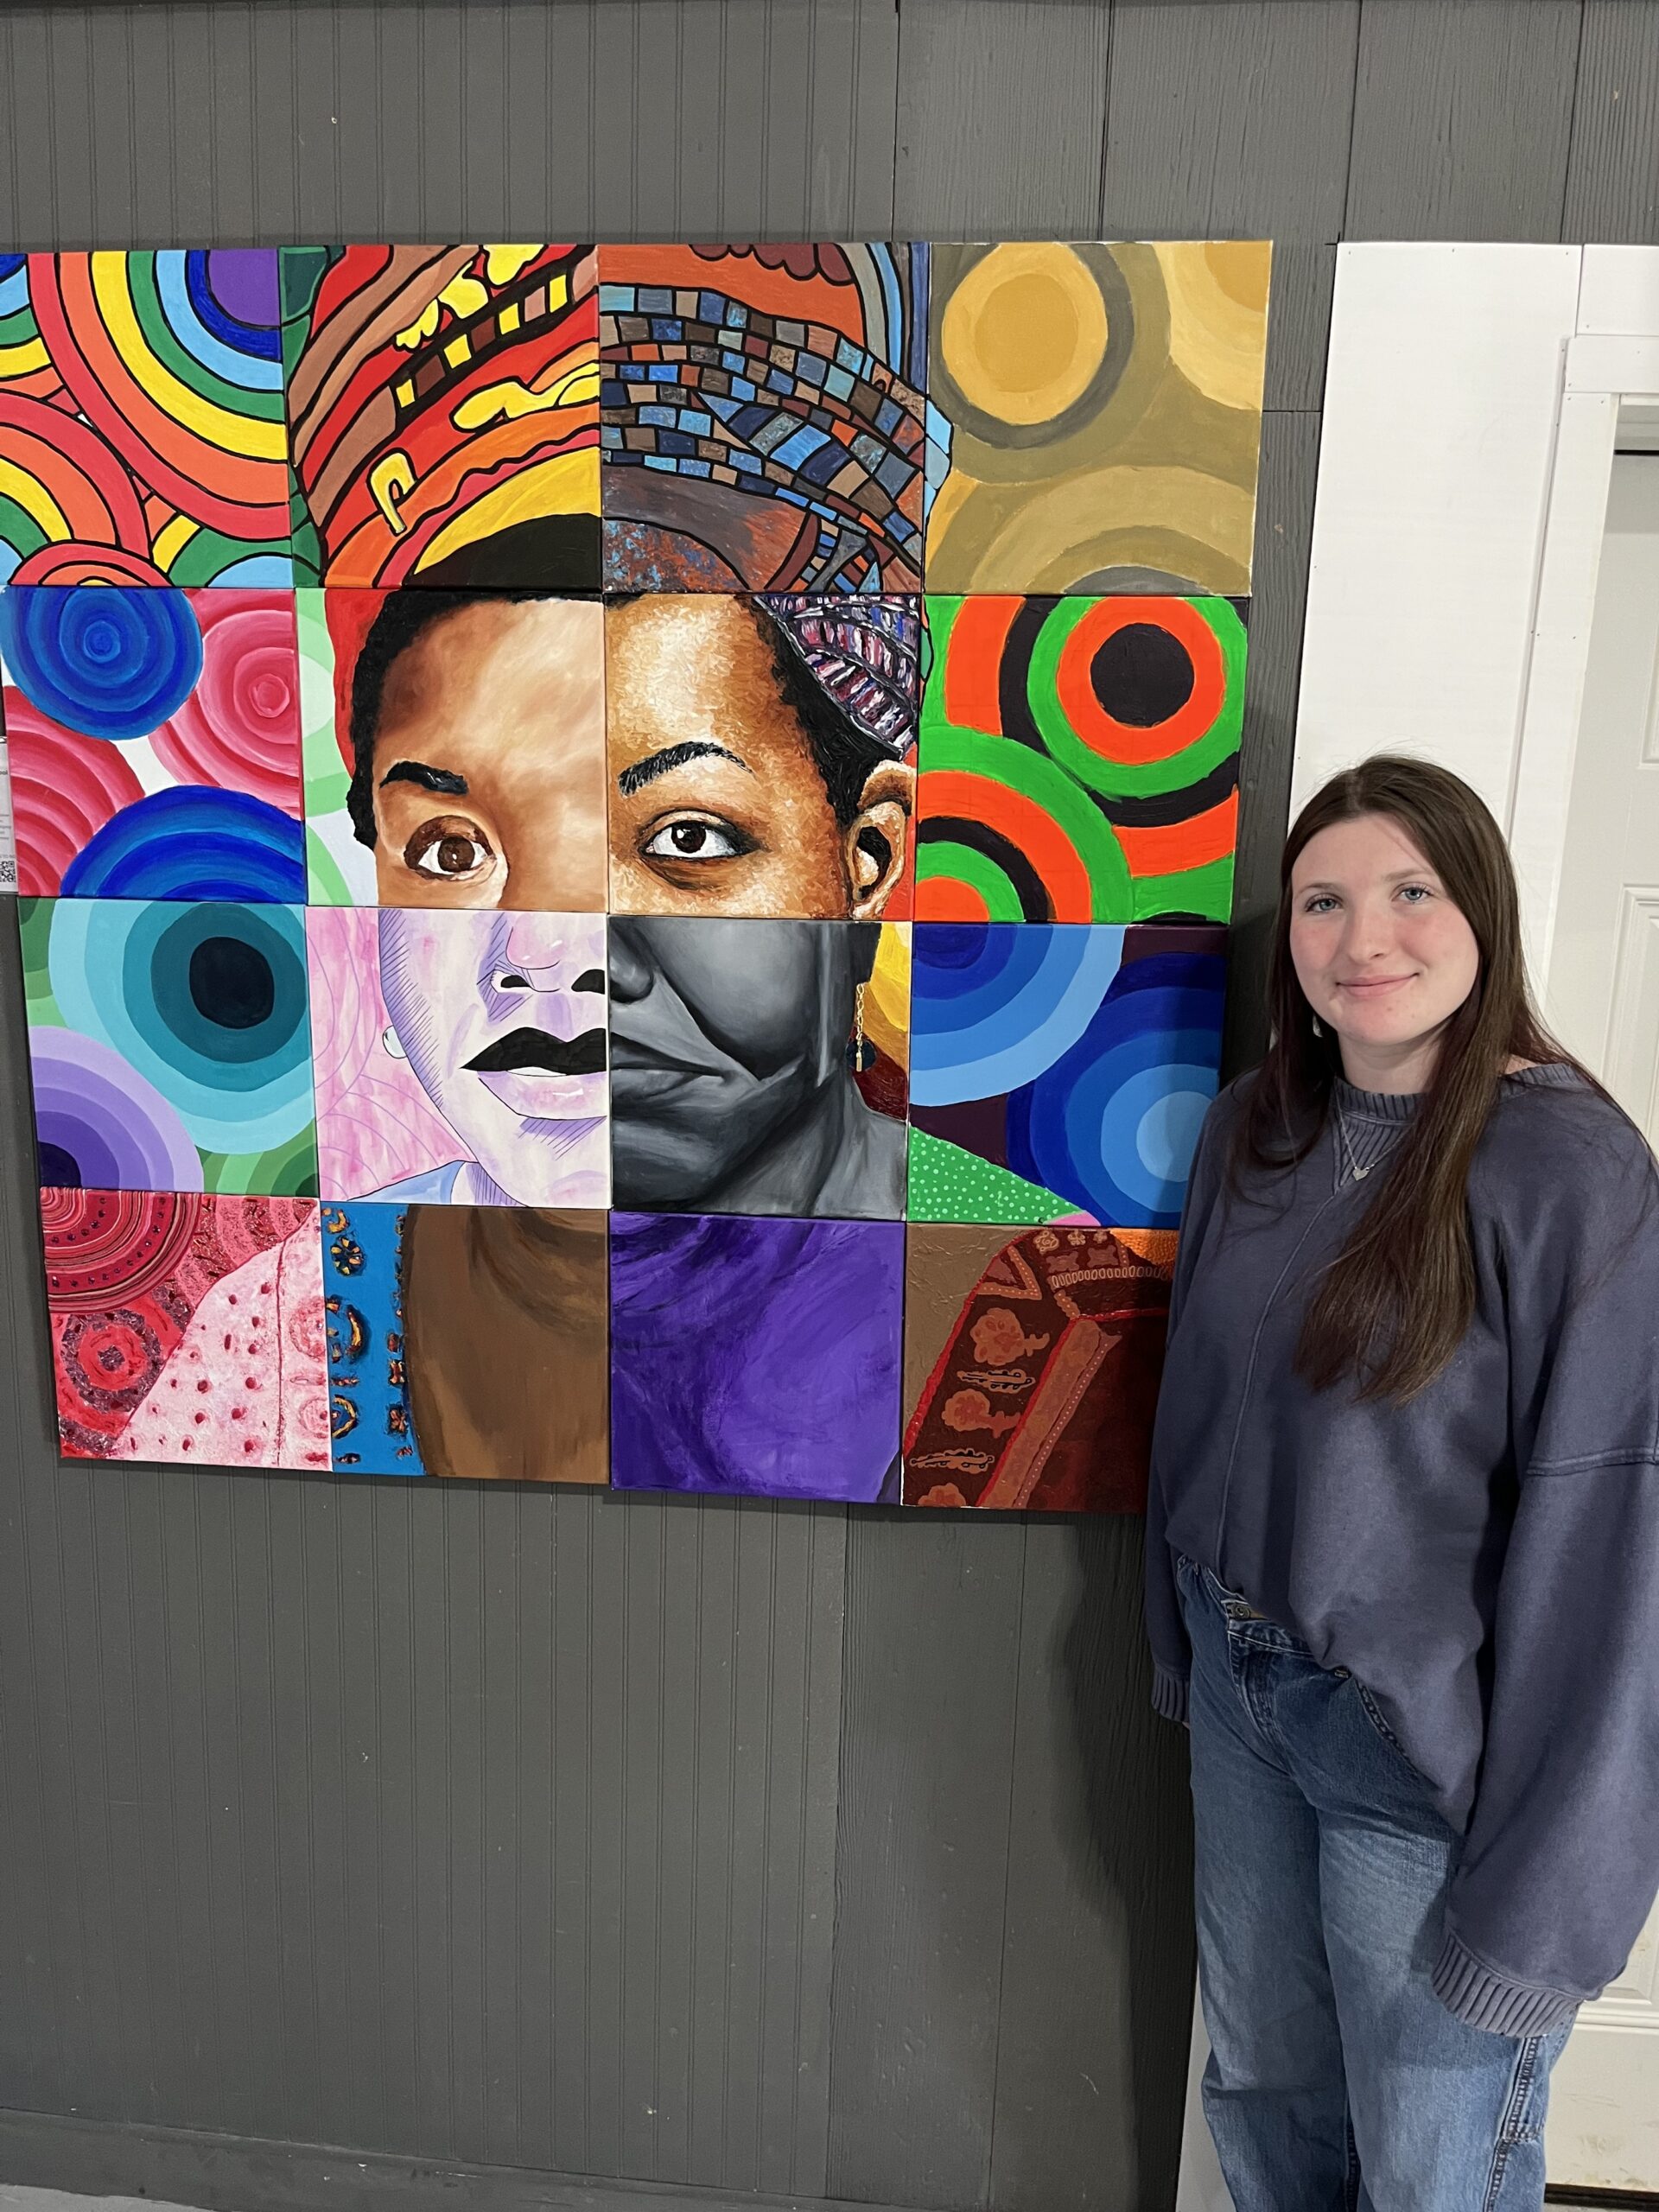 Emelynne Cressy of Center Moriches High School with her collaborative mural of Maya Angelou. ELIZABETH VESPE